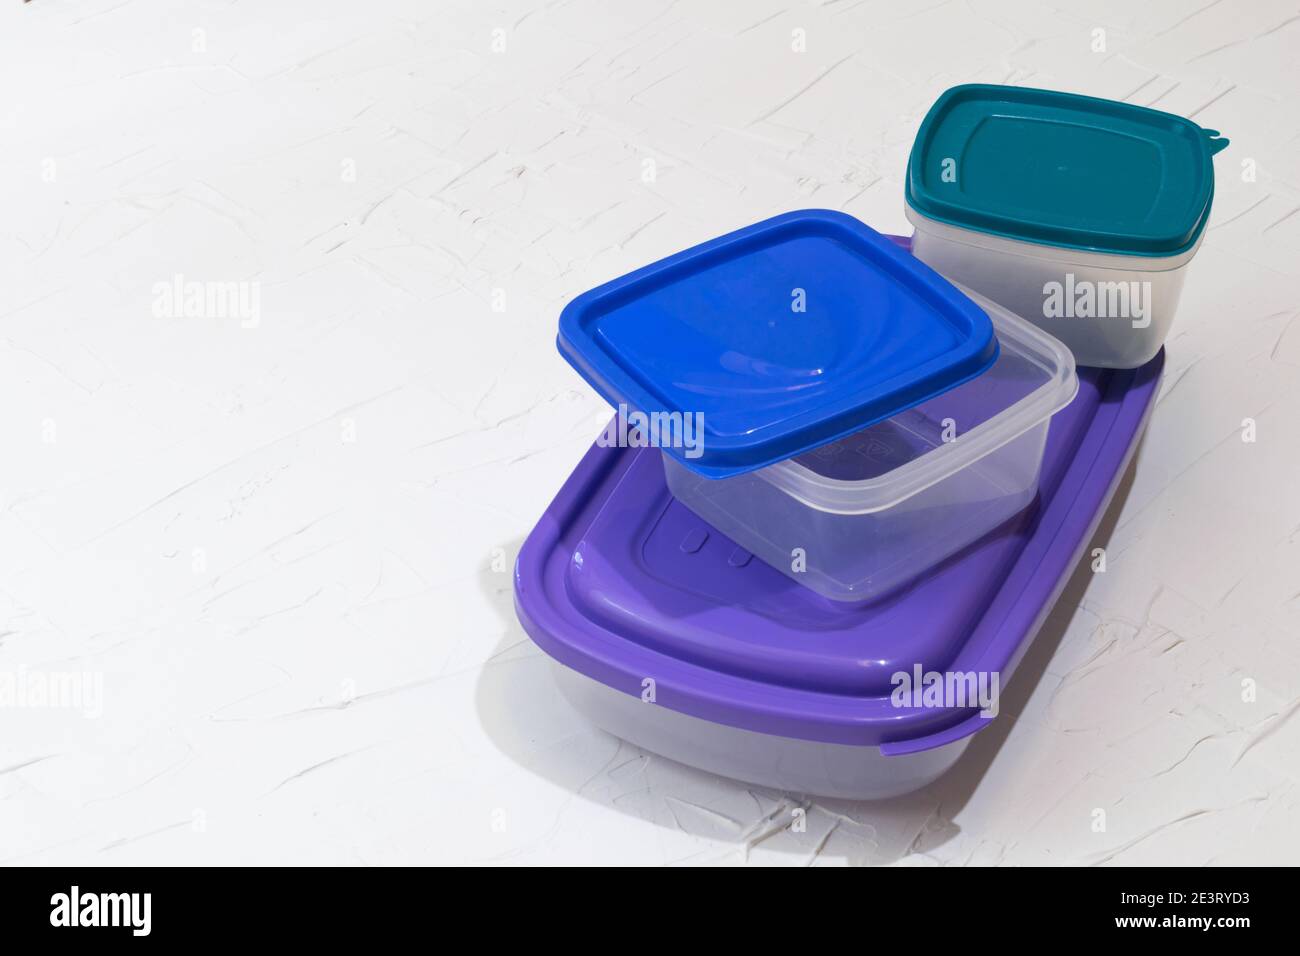 https://c8.alamy.com/comp/2E3RYD3/hermetic-plastic-food-containers-on-white-background-2E3RYD3.jpg